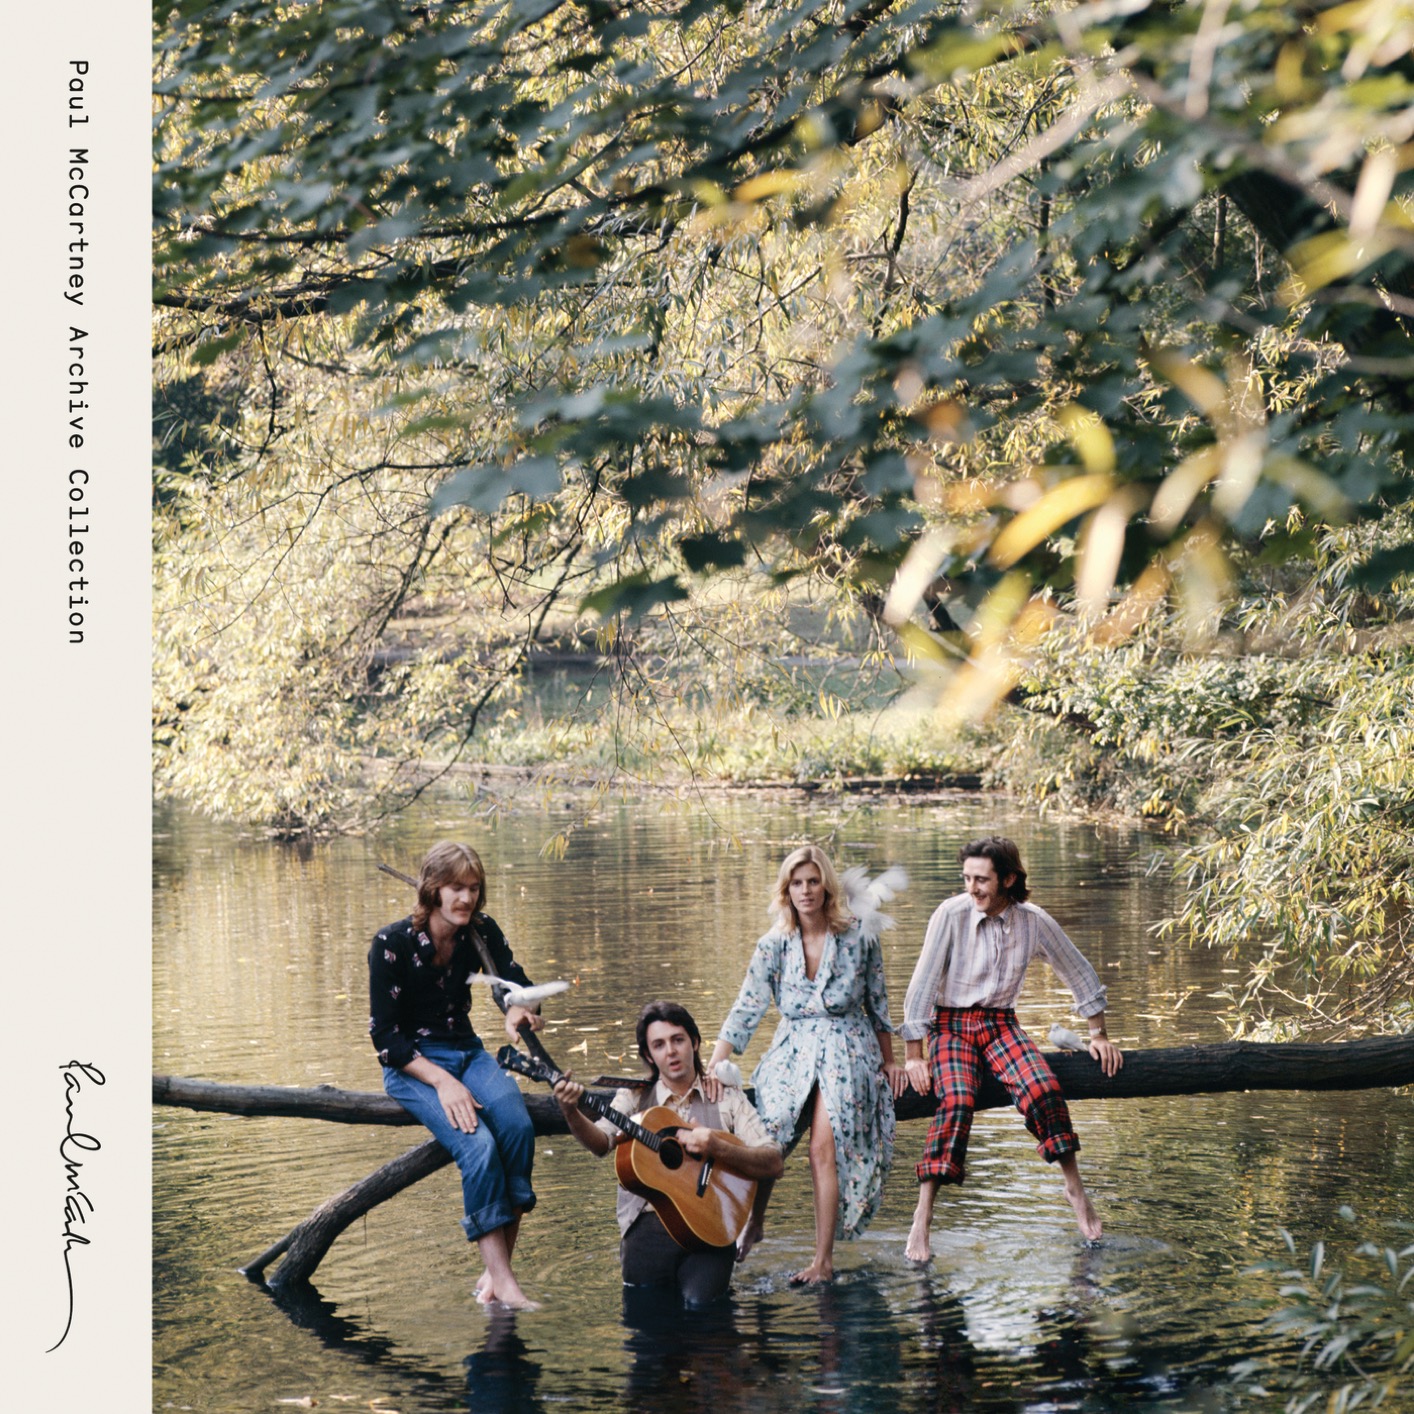 Paul McCartney & Wings - Wild Life (Special Edition) (1971/2018) [FLAC 24bit/96kHz]